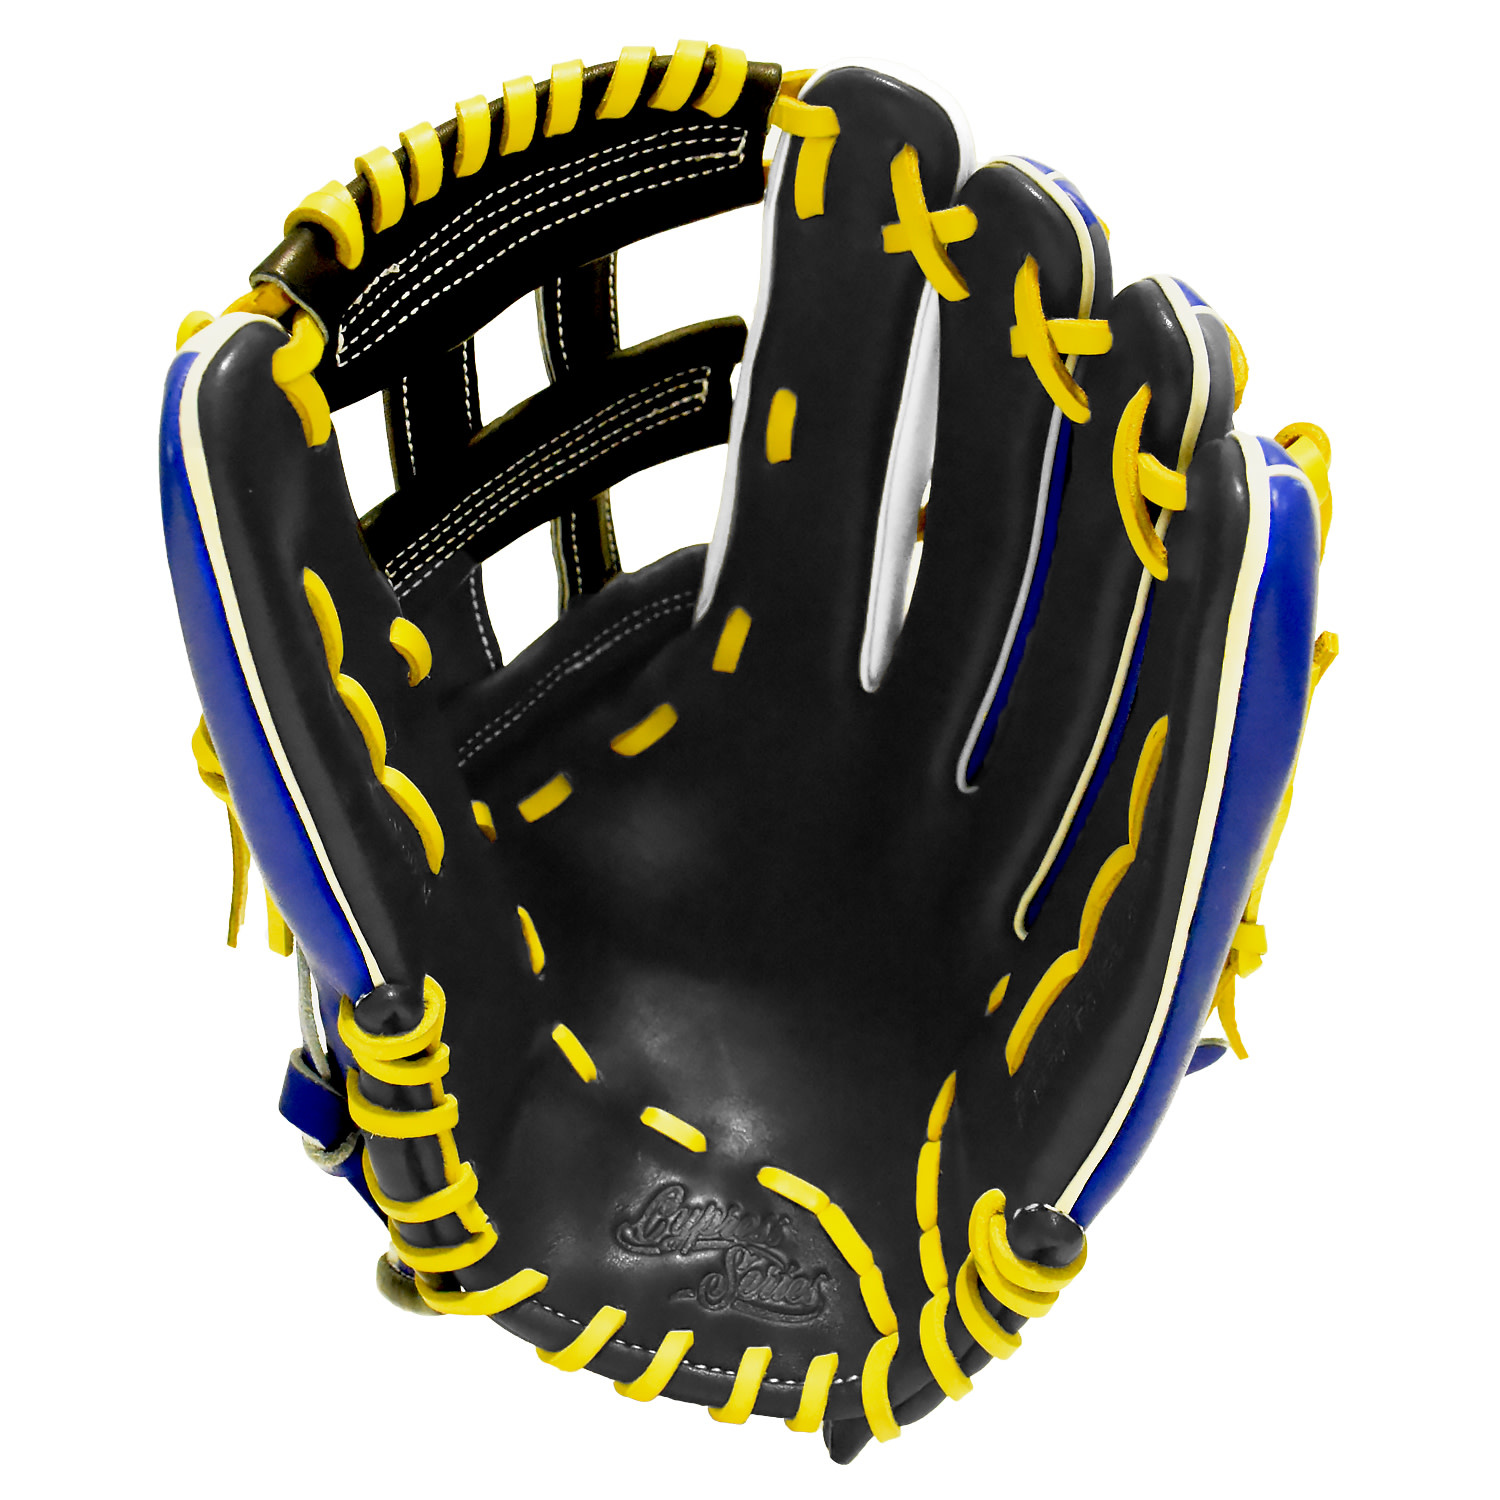 Marucci January Glove of the Month CYPRESS SERIES custom MFGCY-SMU series glove outfield 12.75'' RHT